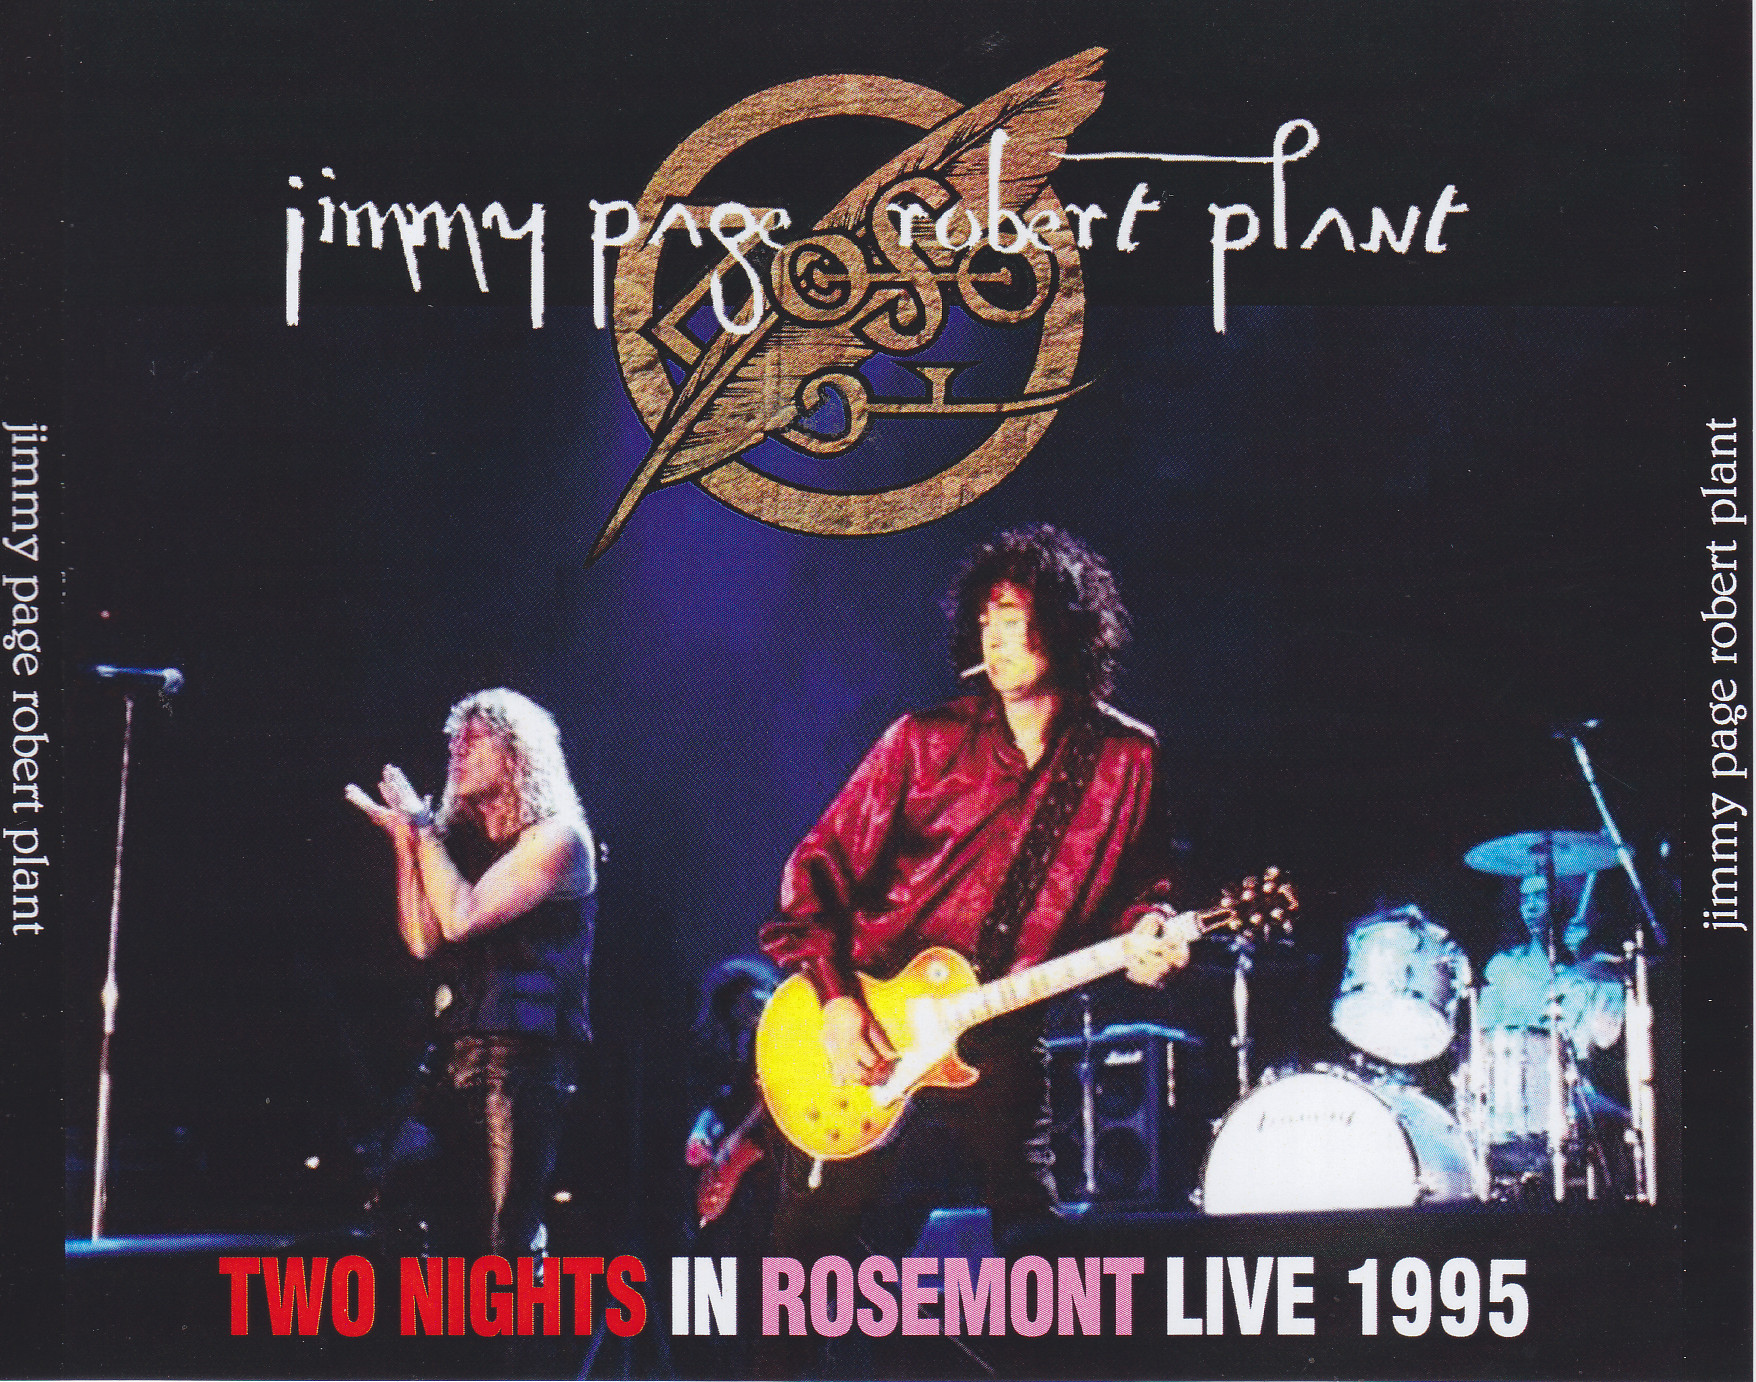 Jimmy Page & Robert Plant / Two Nights In Rosemont Live 1995 